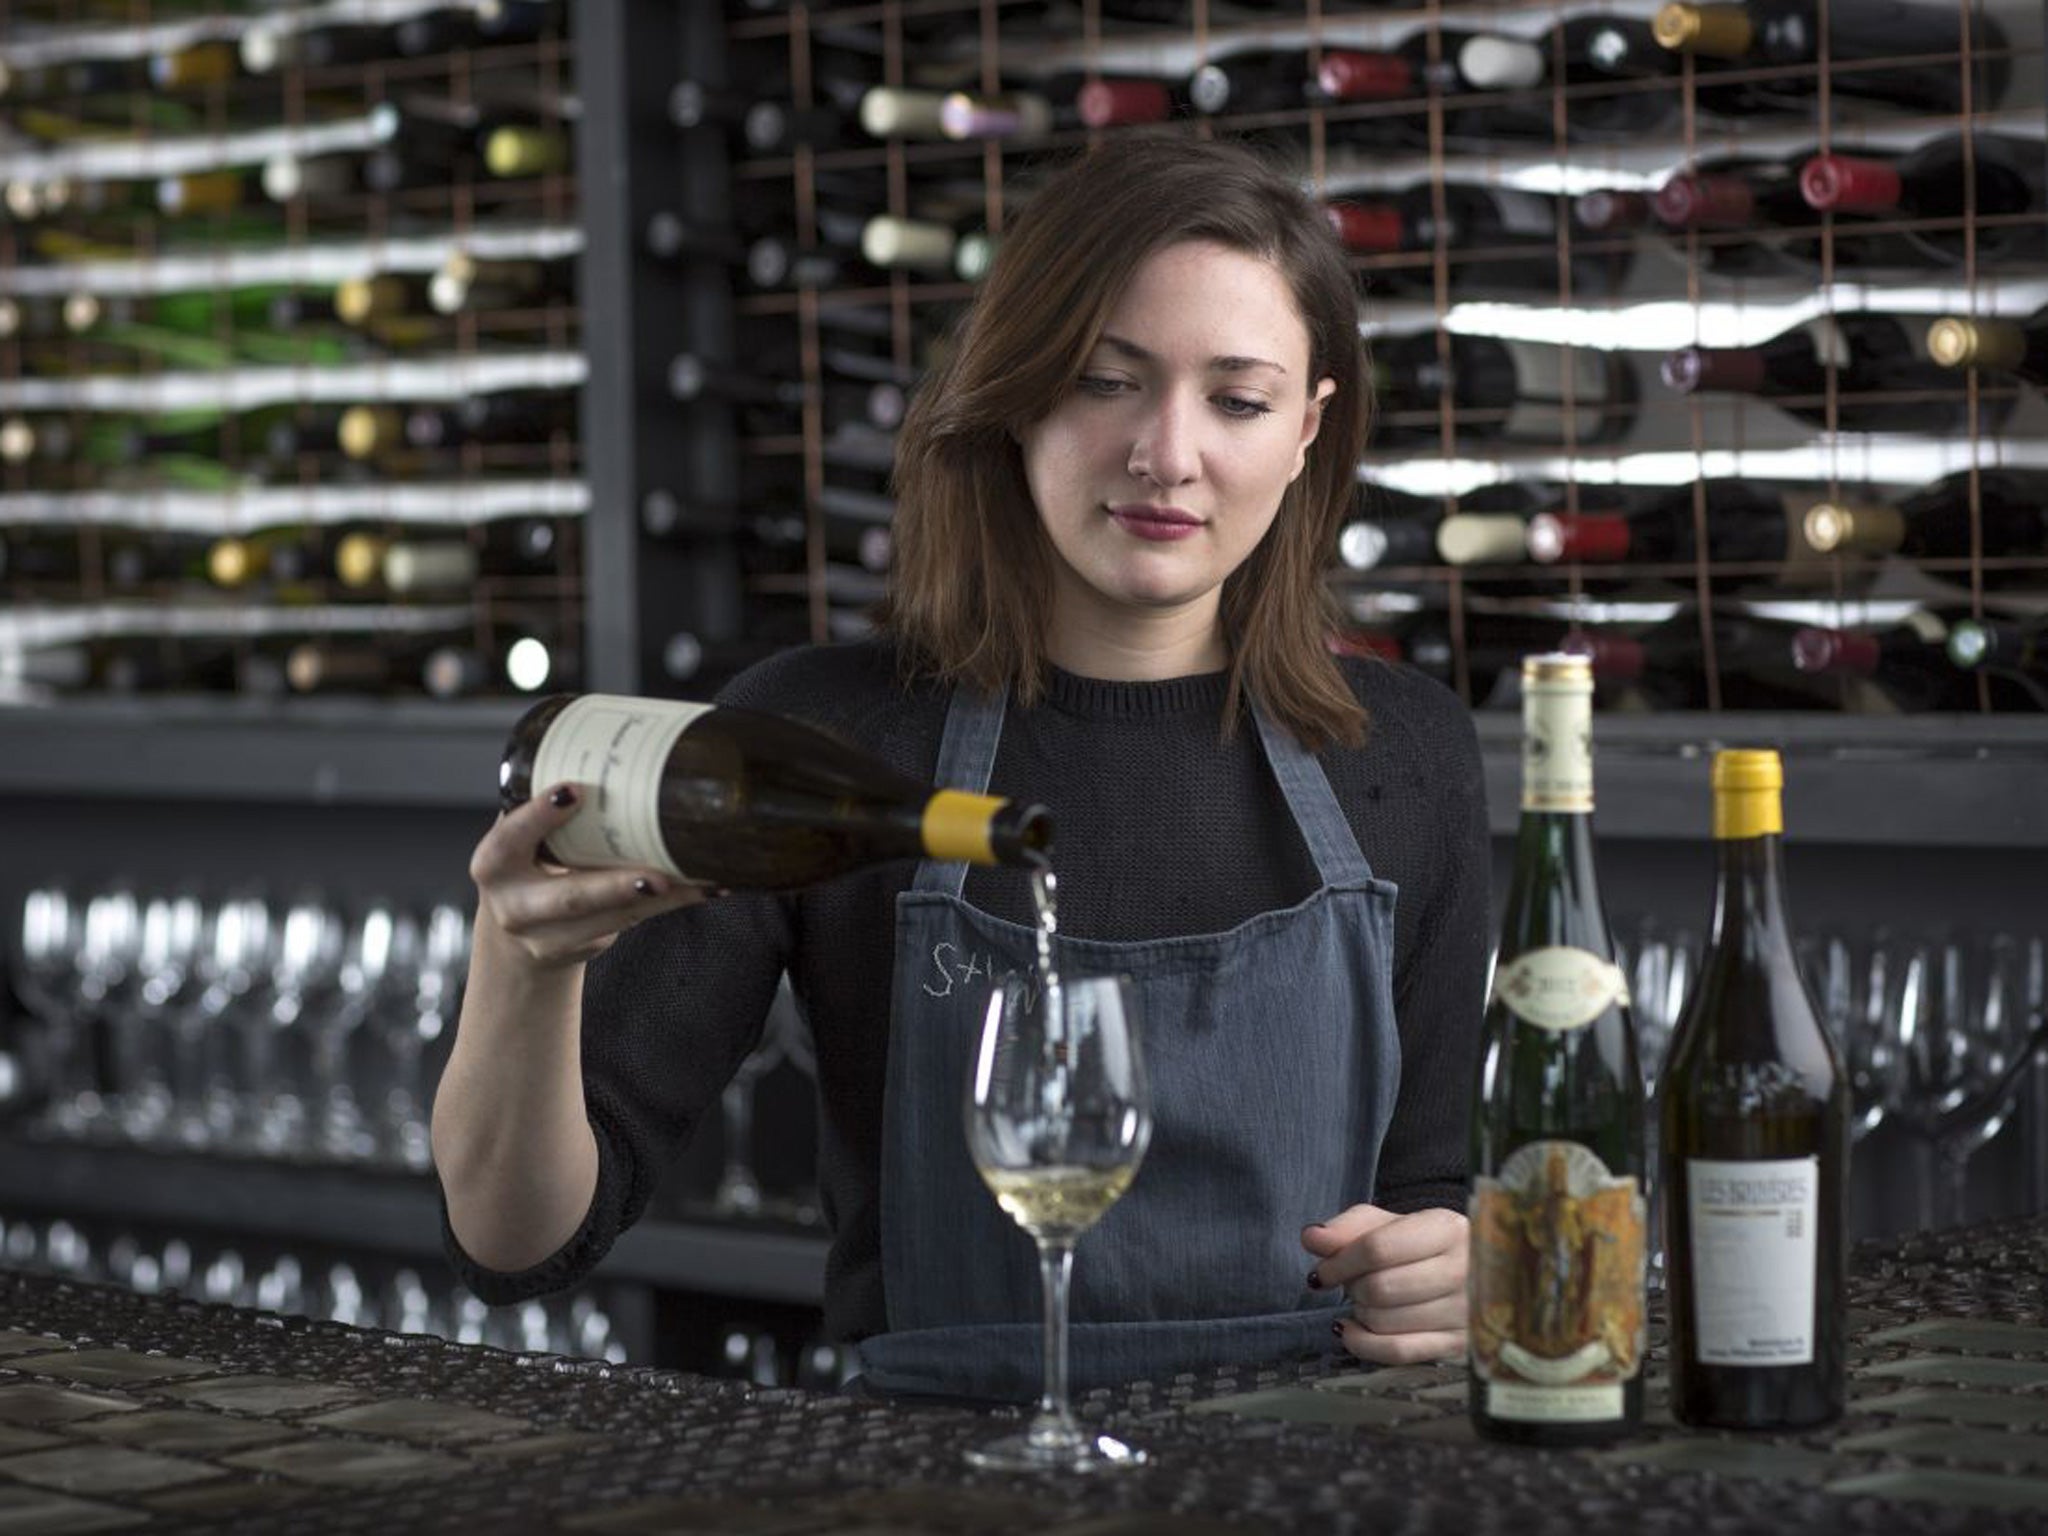 At 25, wine-lover Paisley Tara Kennett is already the general manager of Sager + Wilde wine bar in London